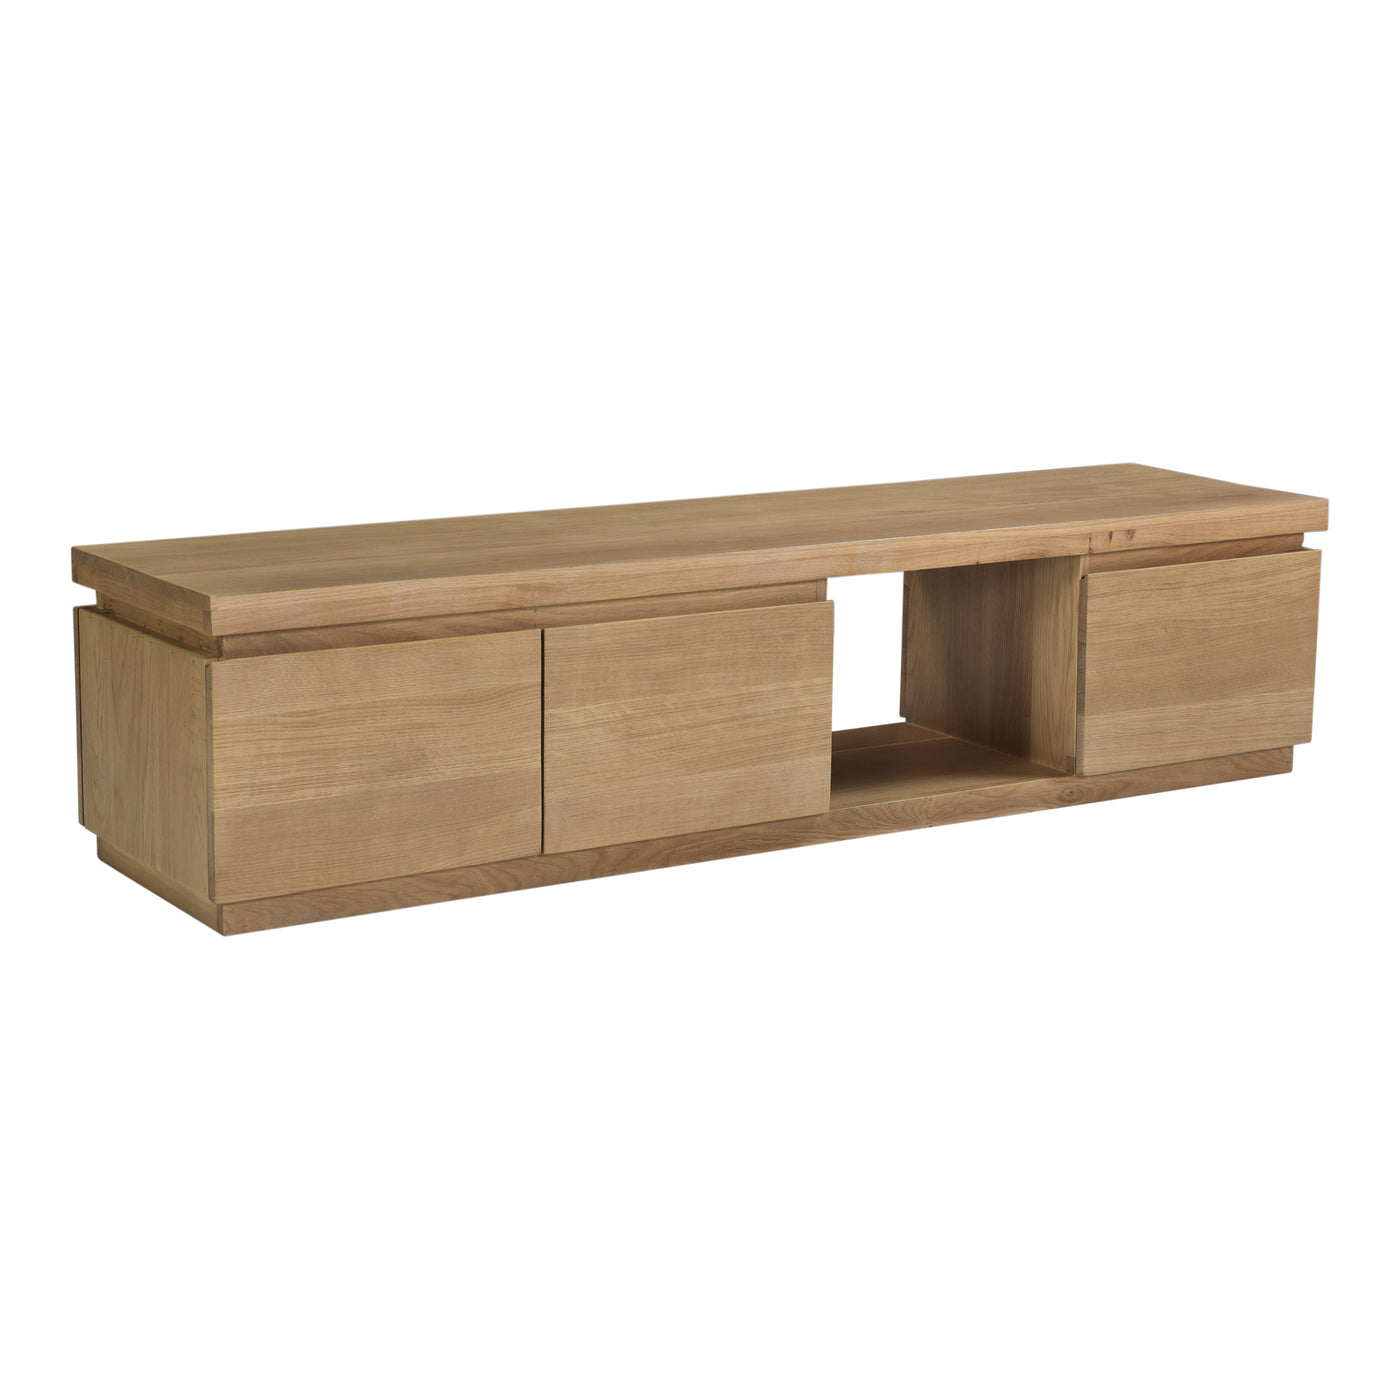 Made from naturally finished solid oak, the Alfie TV table’s organic style is a grounding element for your entertainment s...